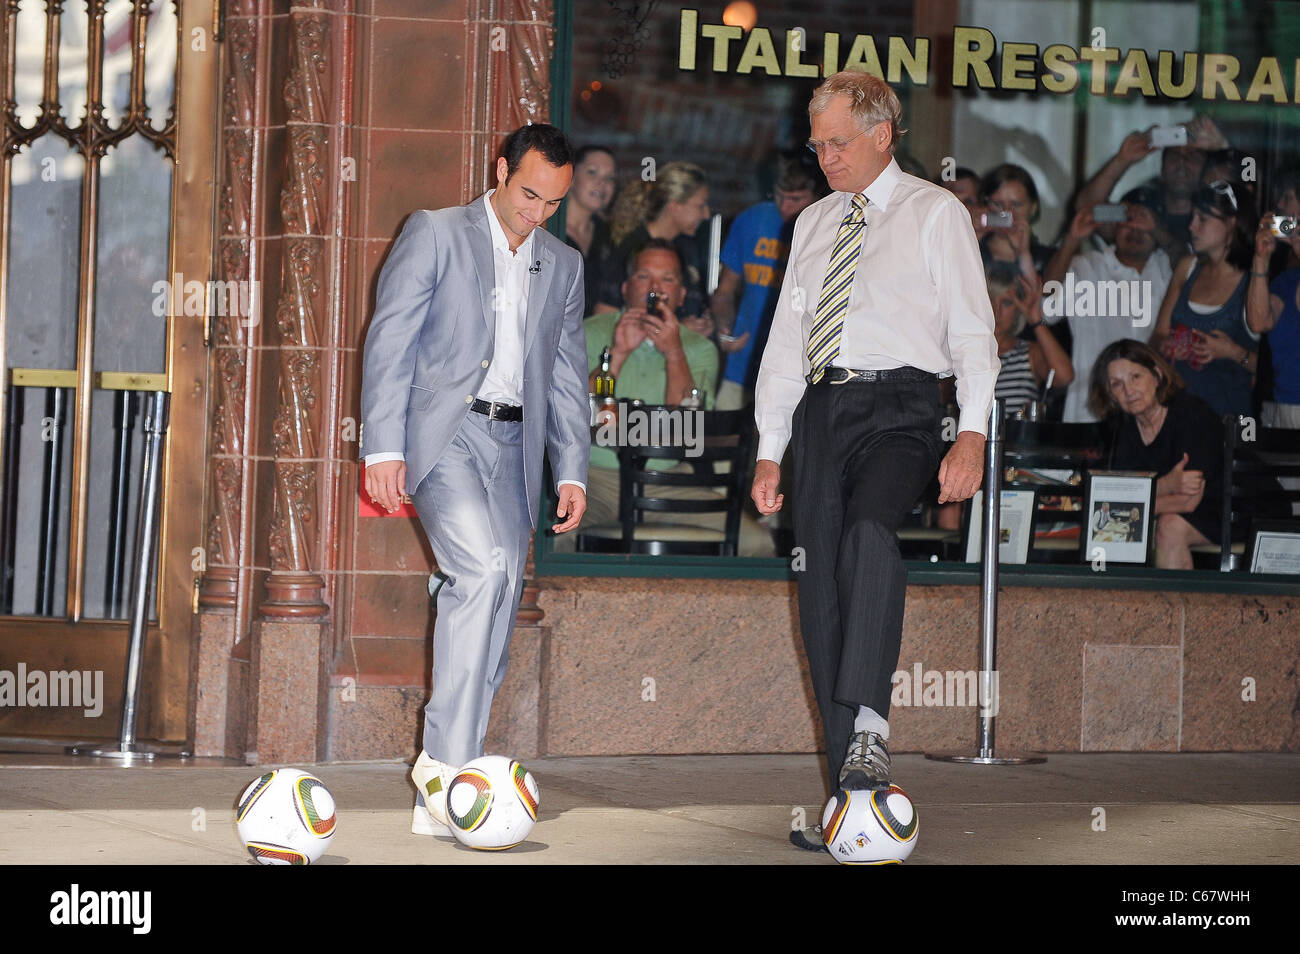 Professional soccer player Landon Donovan, David Letterman, perform skit in front of the Ed Sullivan Theater out and about for CELEBRITY CANDIDS - TUESDAY, , New York, NY June 29, 2010. Photo By: Ray Tamarra/Everett Collection Stock Photo